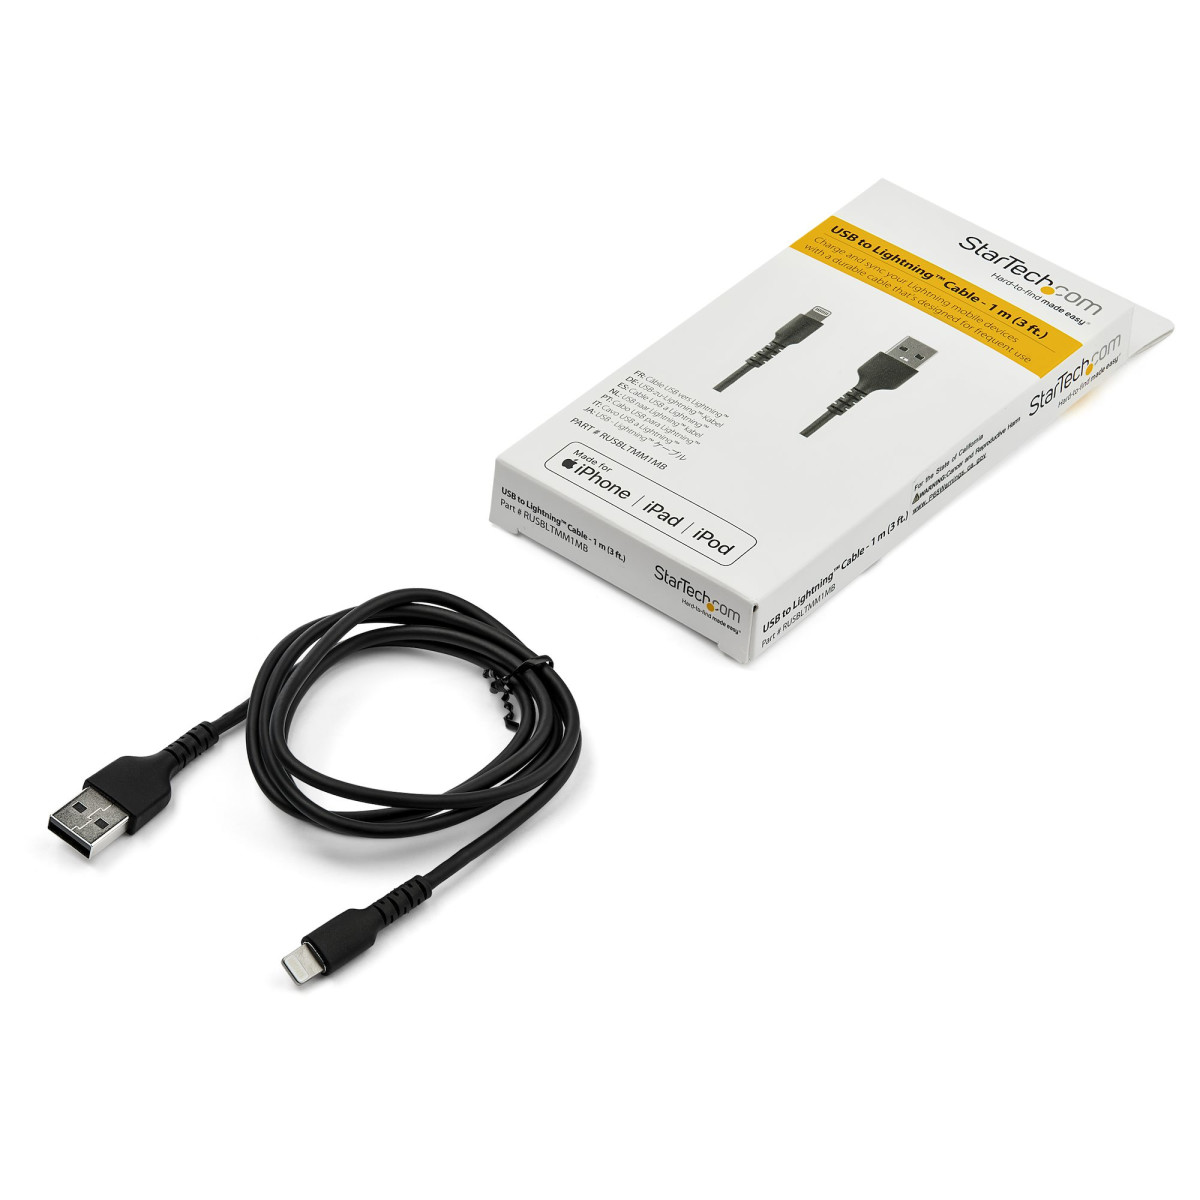 Cable USB to Lightning MFi Certified 1m